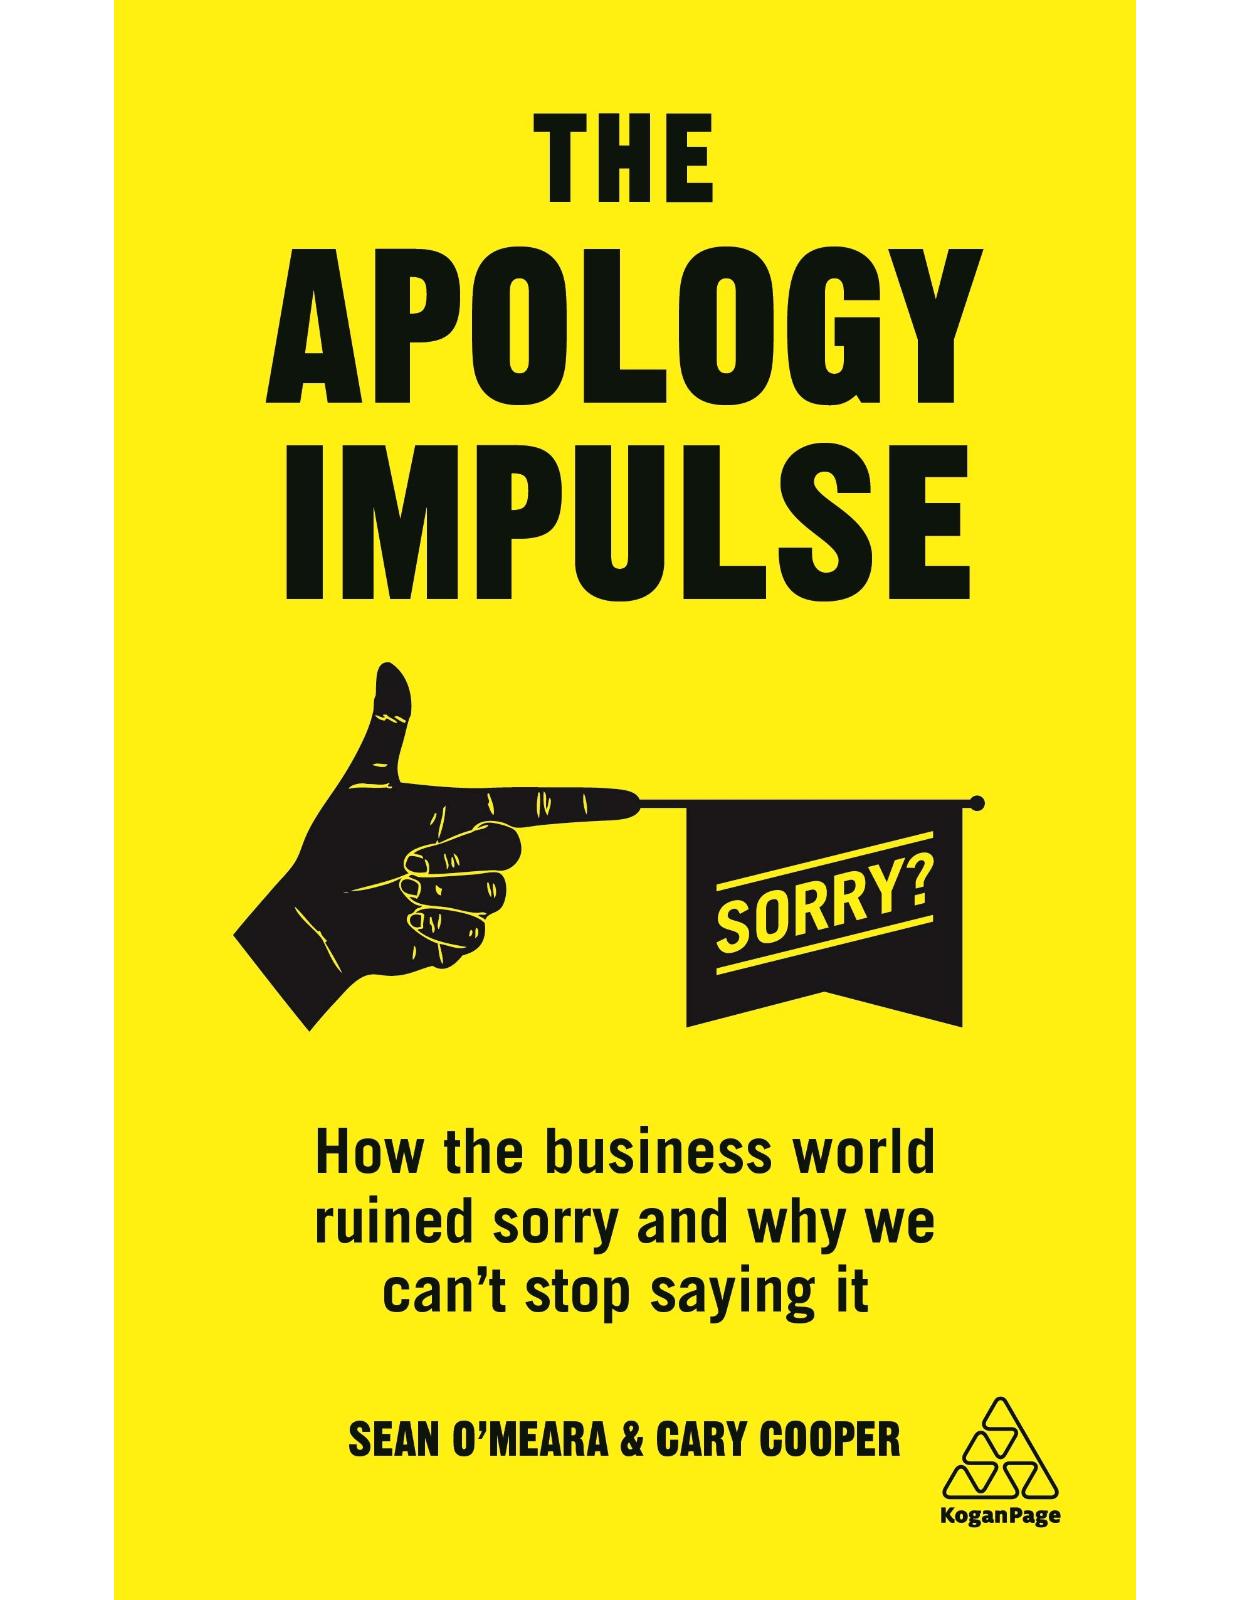 The Apology Impulse: How the Business World Ruined Sorry and Why We Can't Stop Saying It